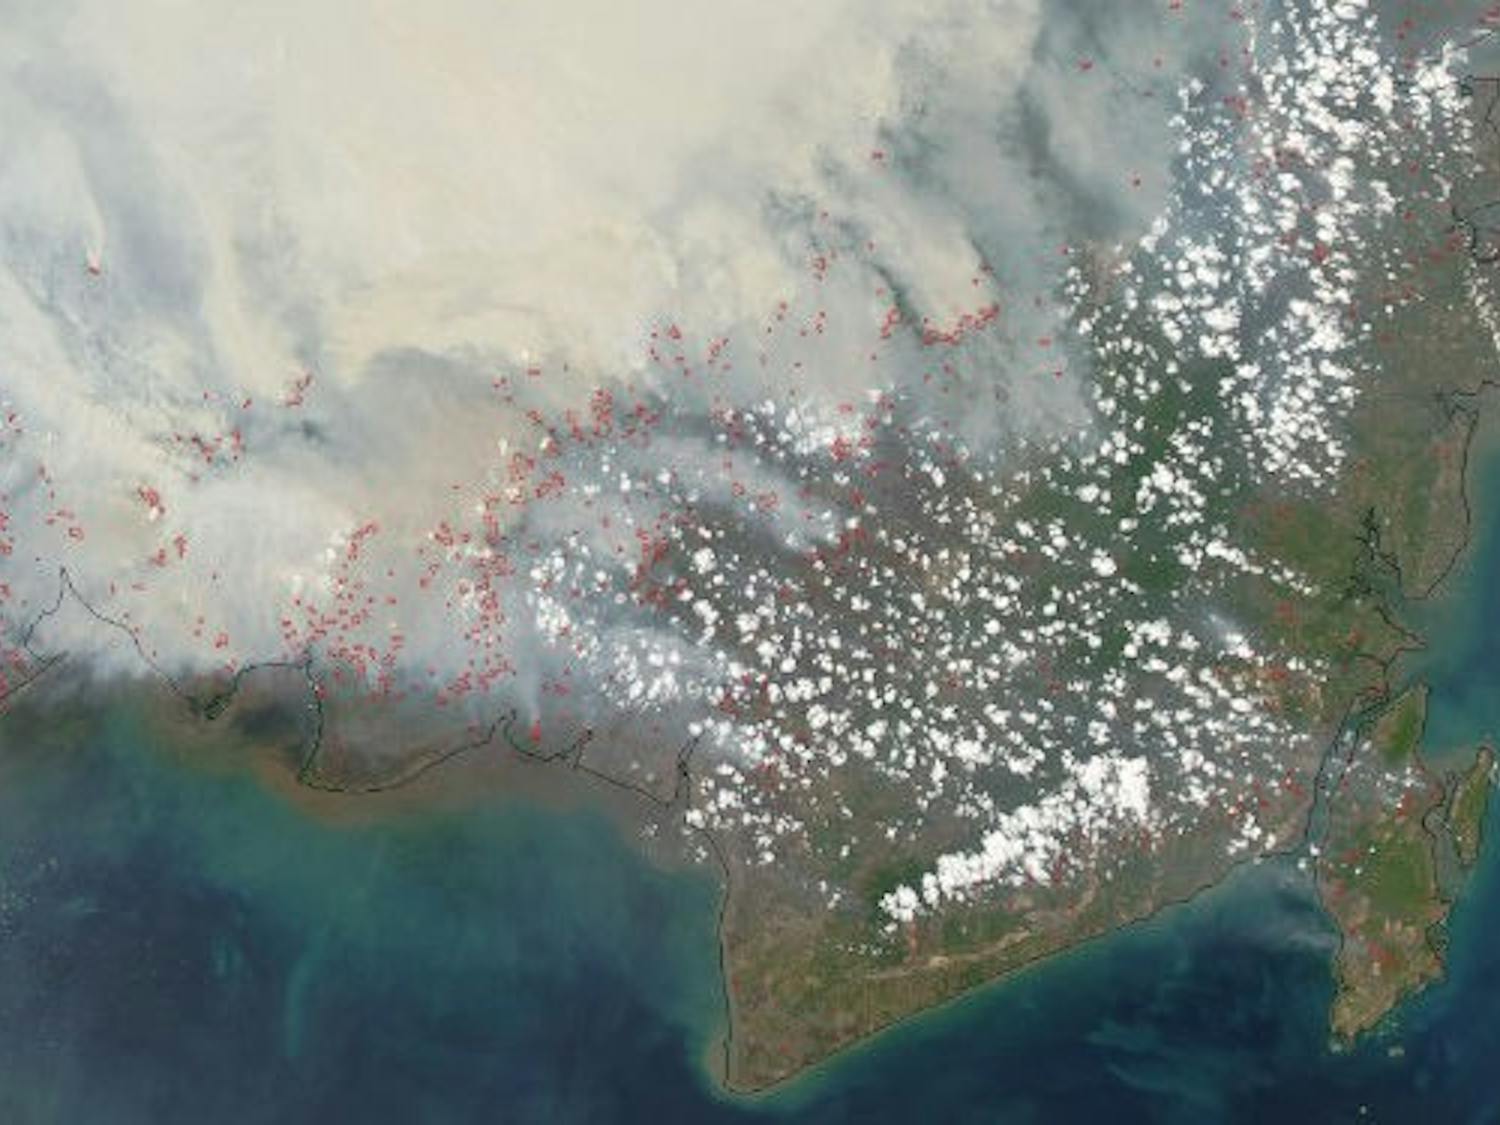 A shot of Southeast Asia from space shows just how widespread the fires are in the region.